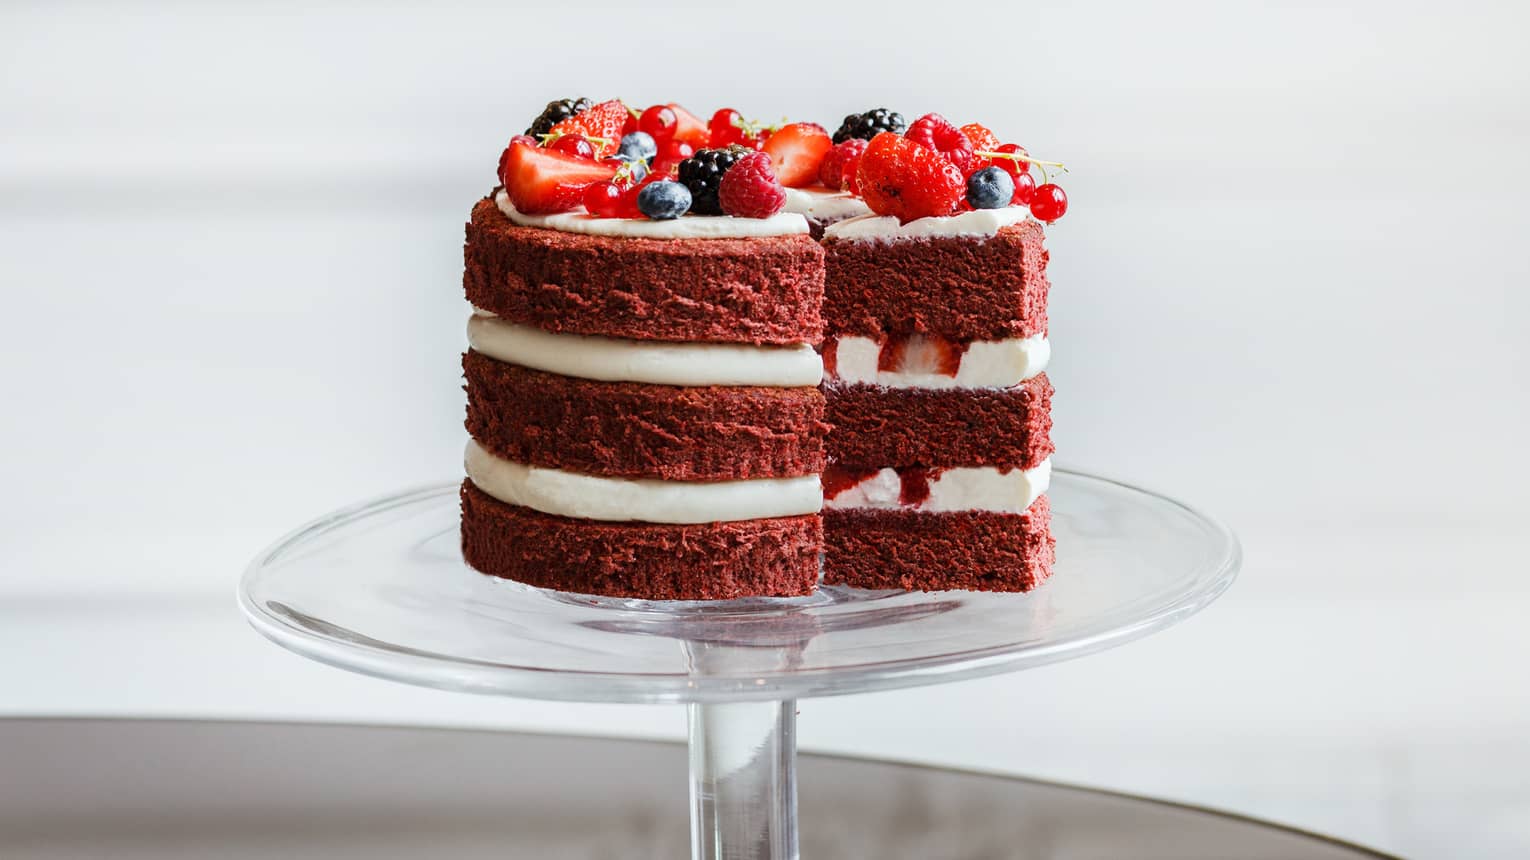 Red velvet layer cake topped with fresh berries on glass cake stand